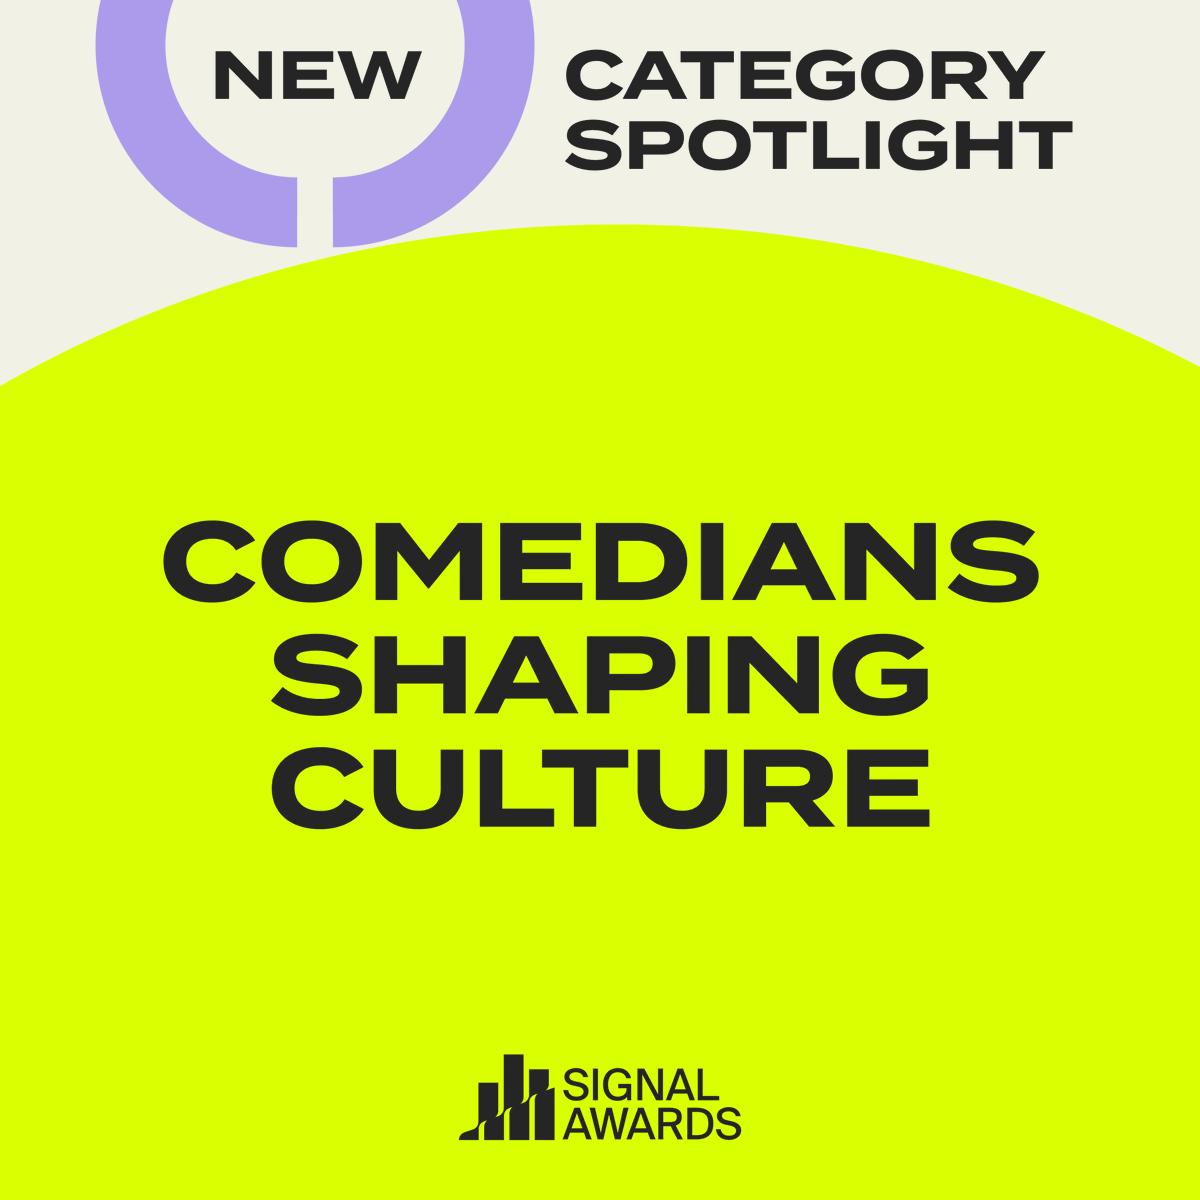 Our mission at The Signal Awards is to recognize the podcasts that define culture, which is why we're introducing new categories like Comedians Shaping Culture. You can find more information on categories, judges, and how to enter at signalaward.com.